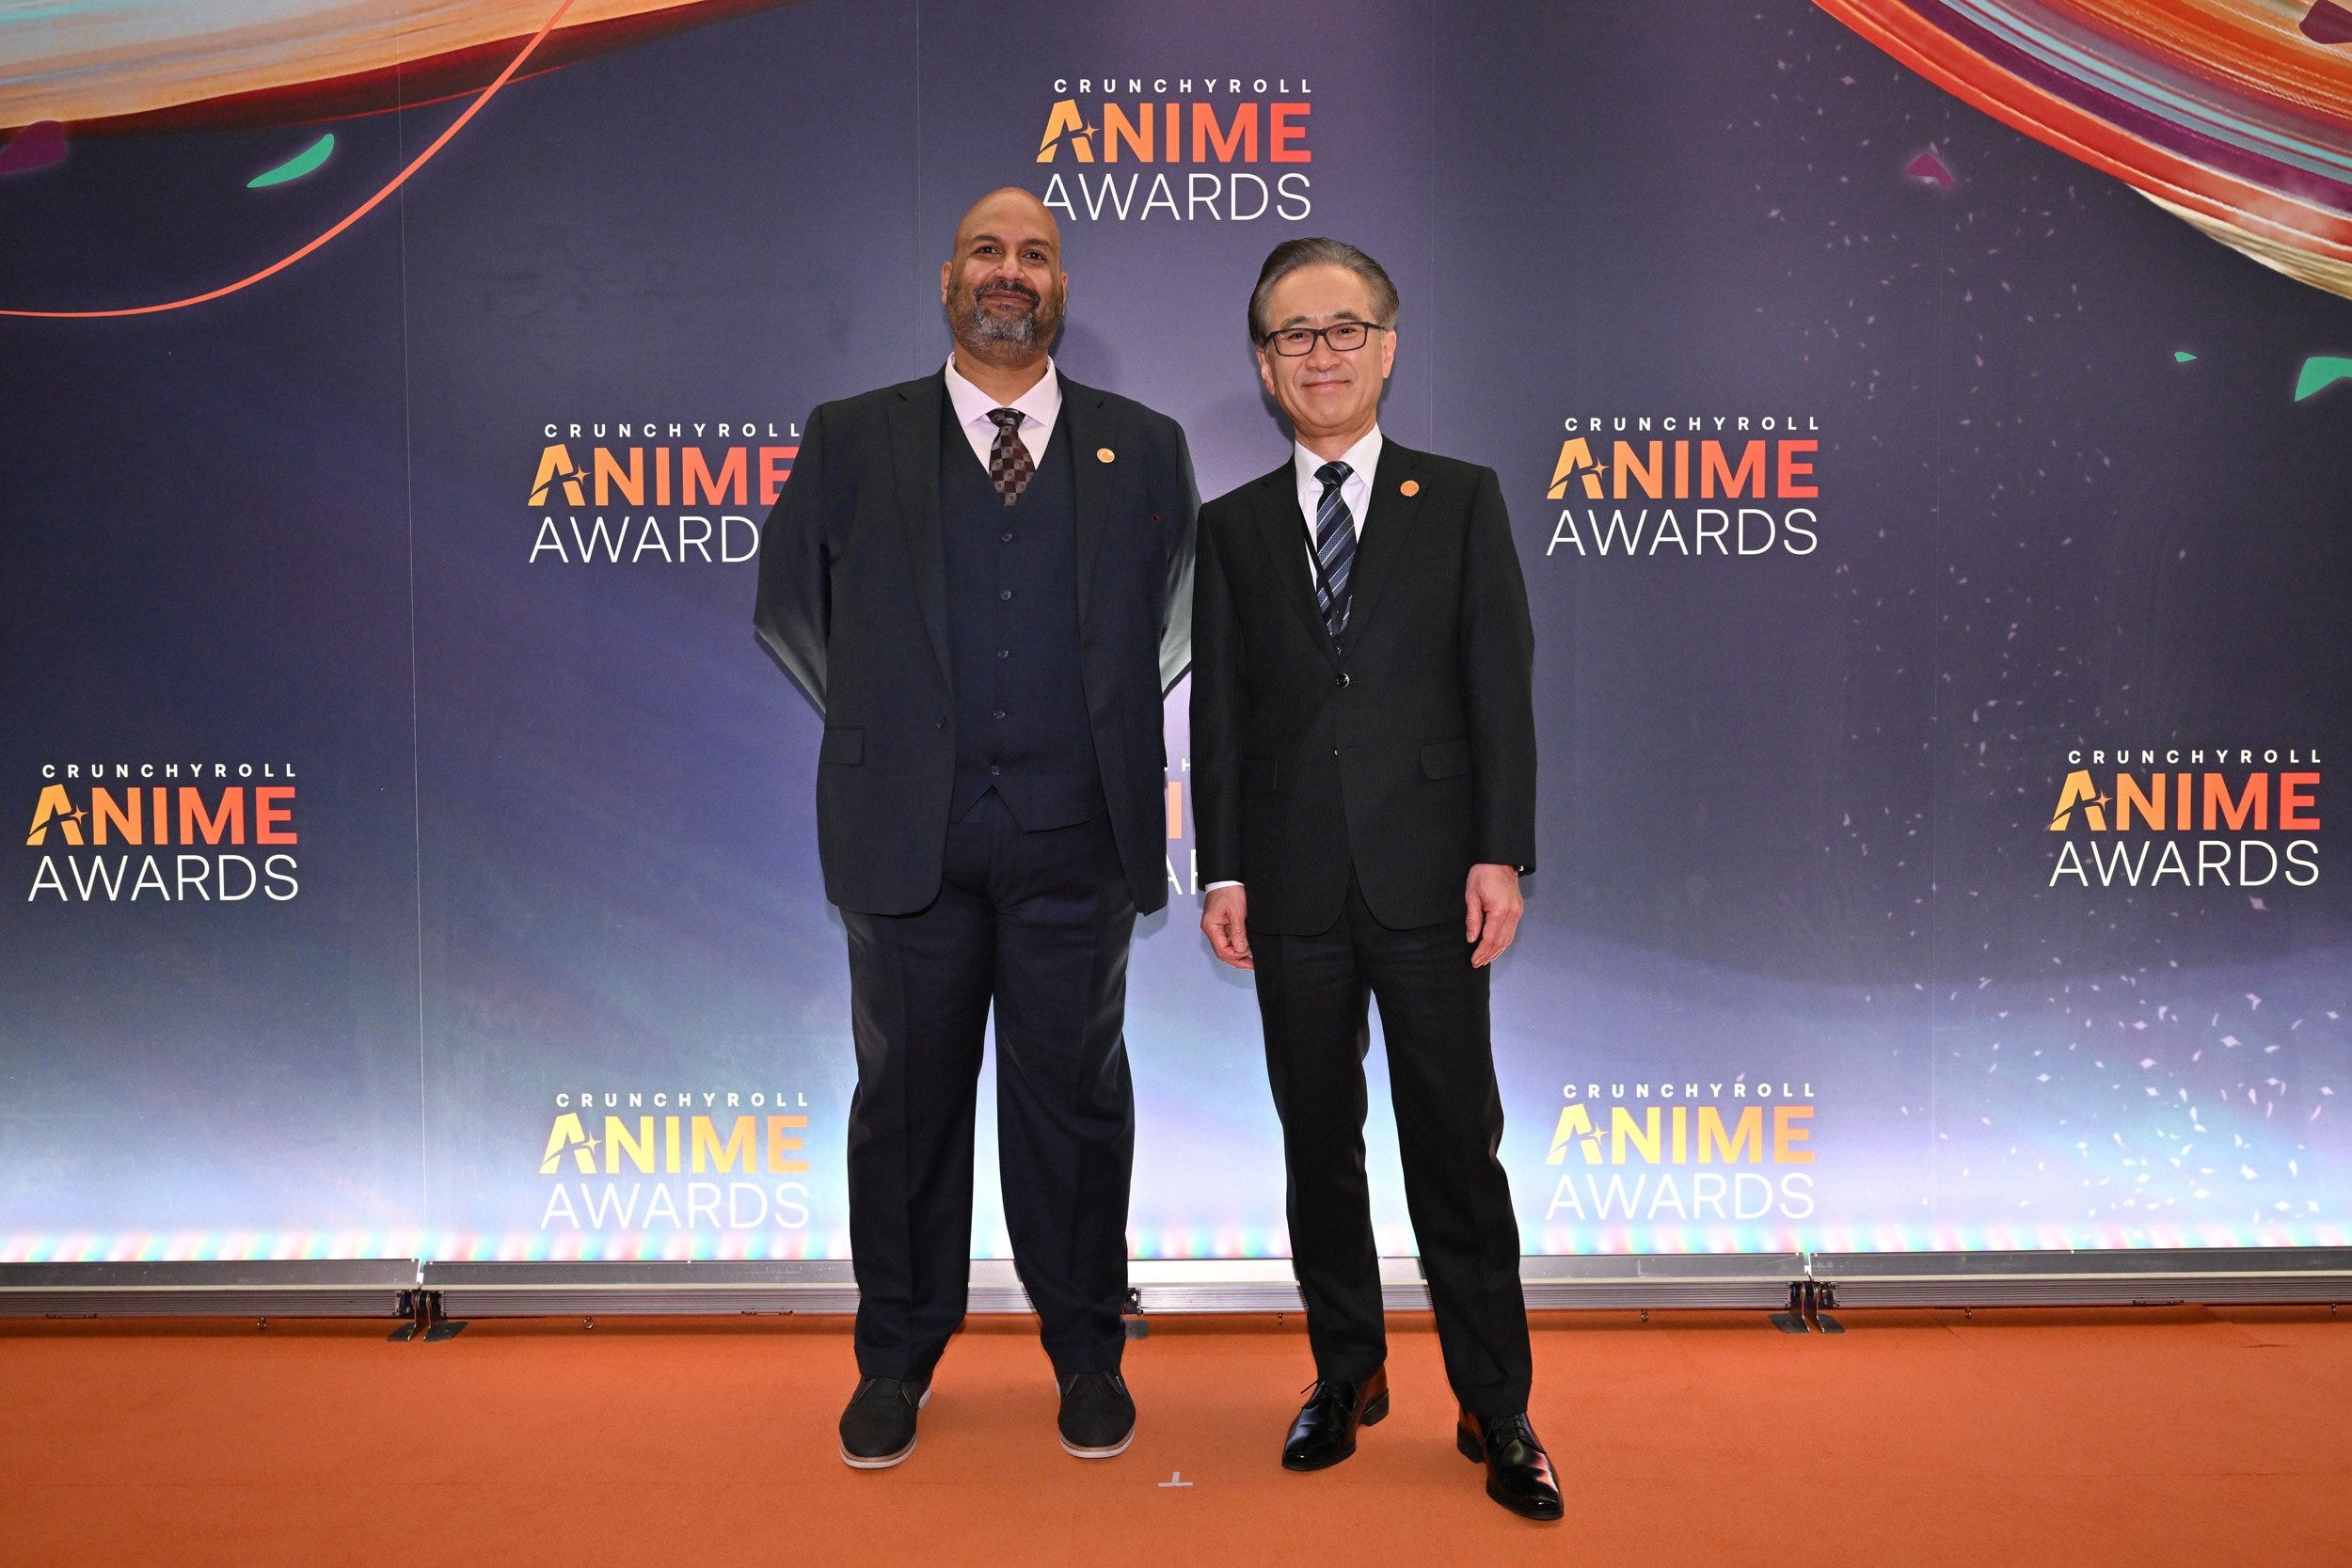 2023 Anime Awards Nominations Announced by Crunchyroll